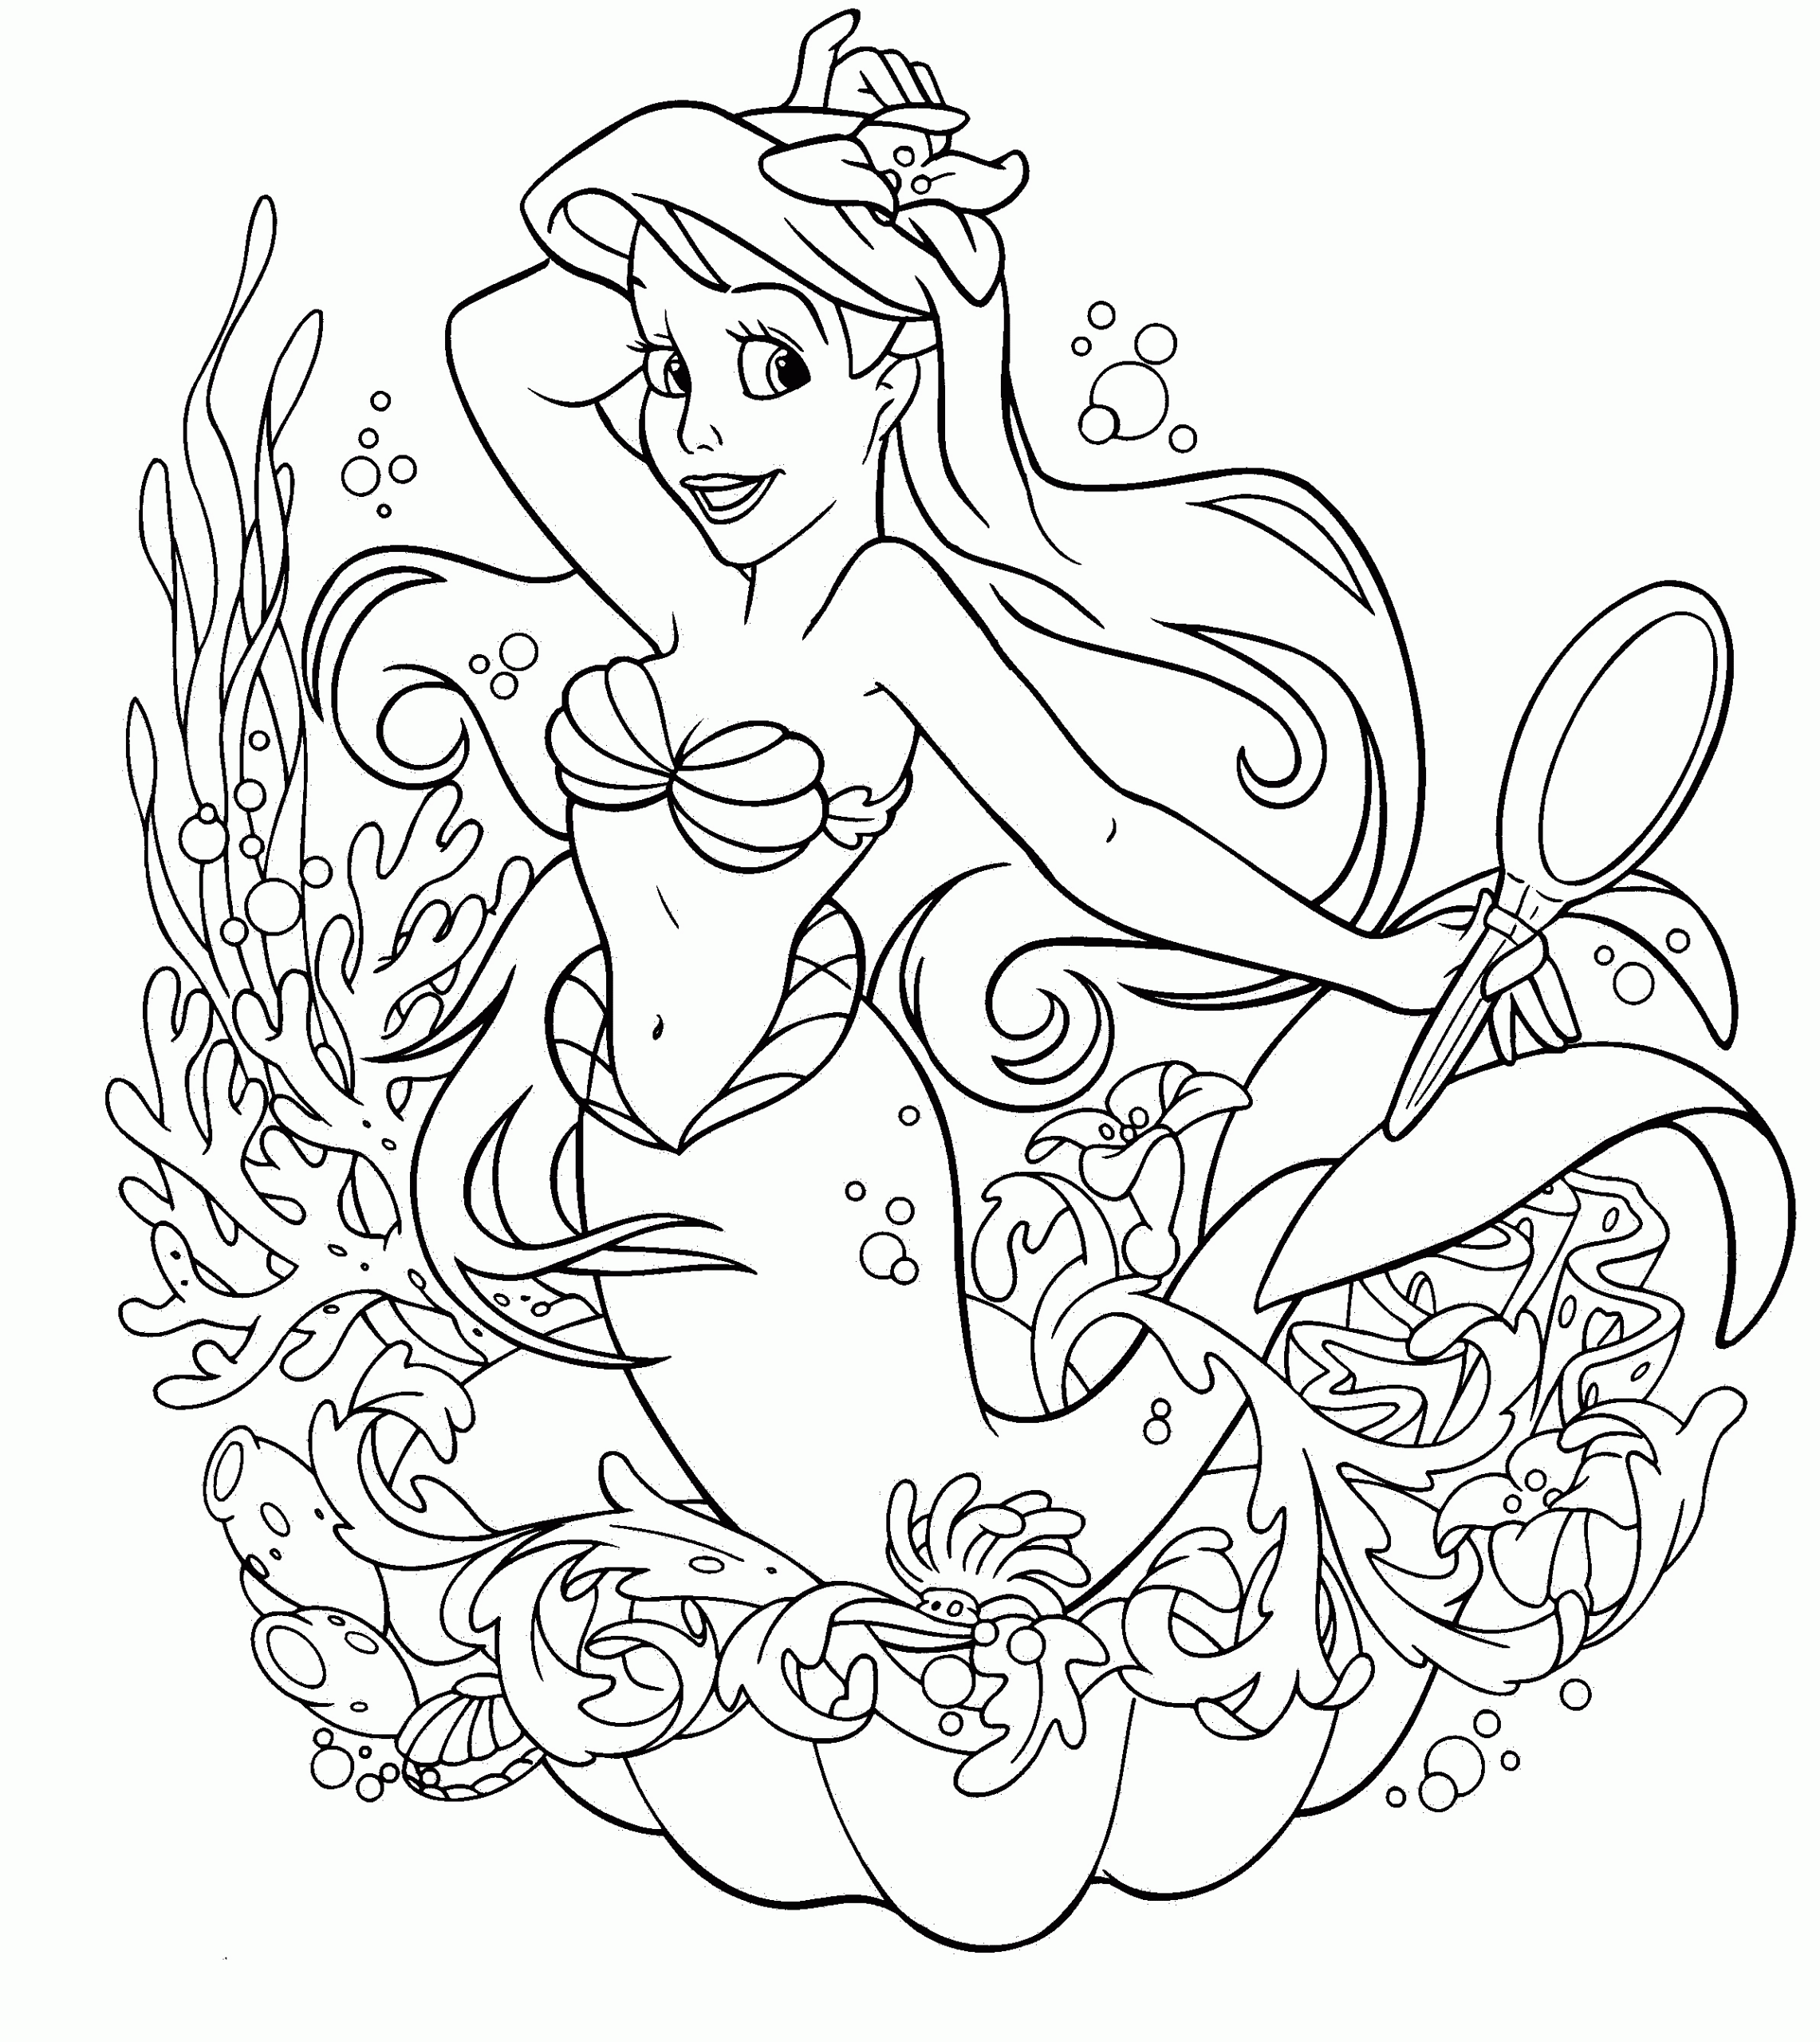 Disney Coloring Pages For Girls
 1000 images about Colouring on Pinterest